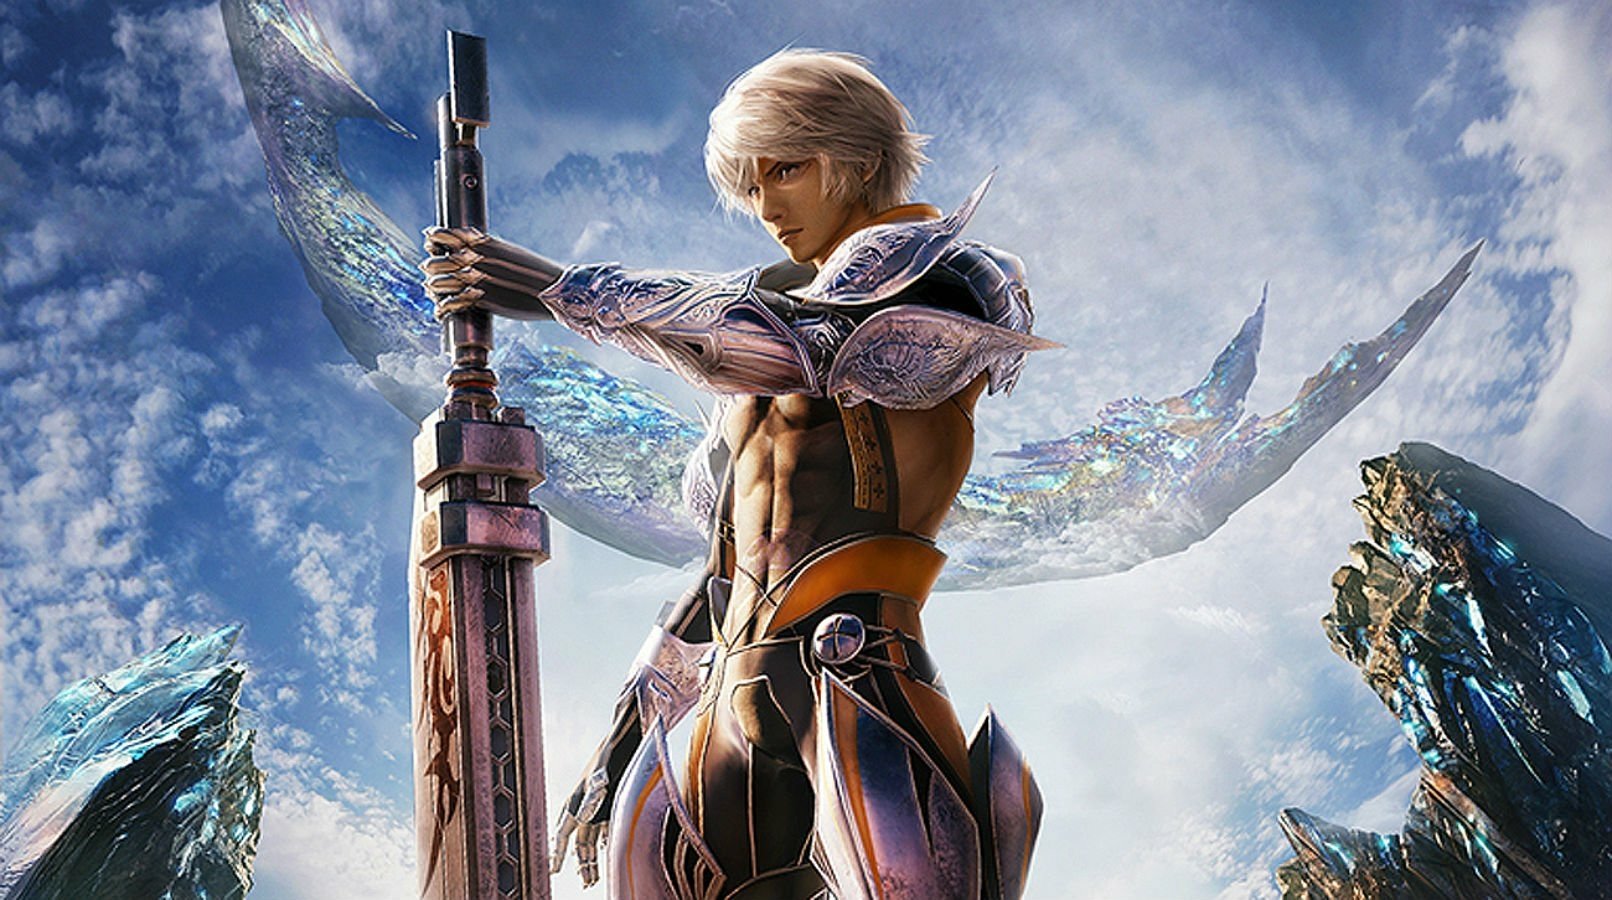 Mobius Final Fantasy 壁纸and 背景 1612x900